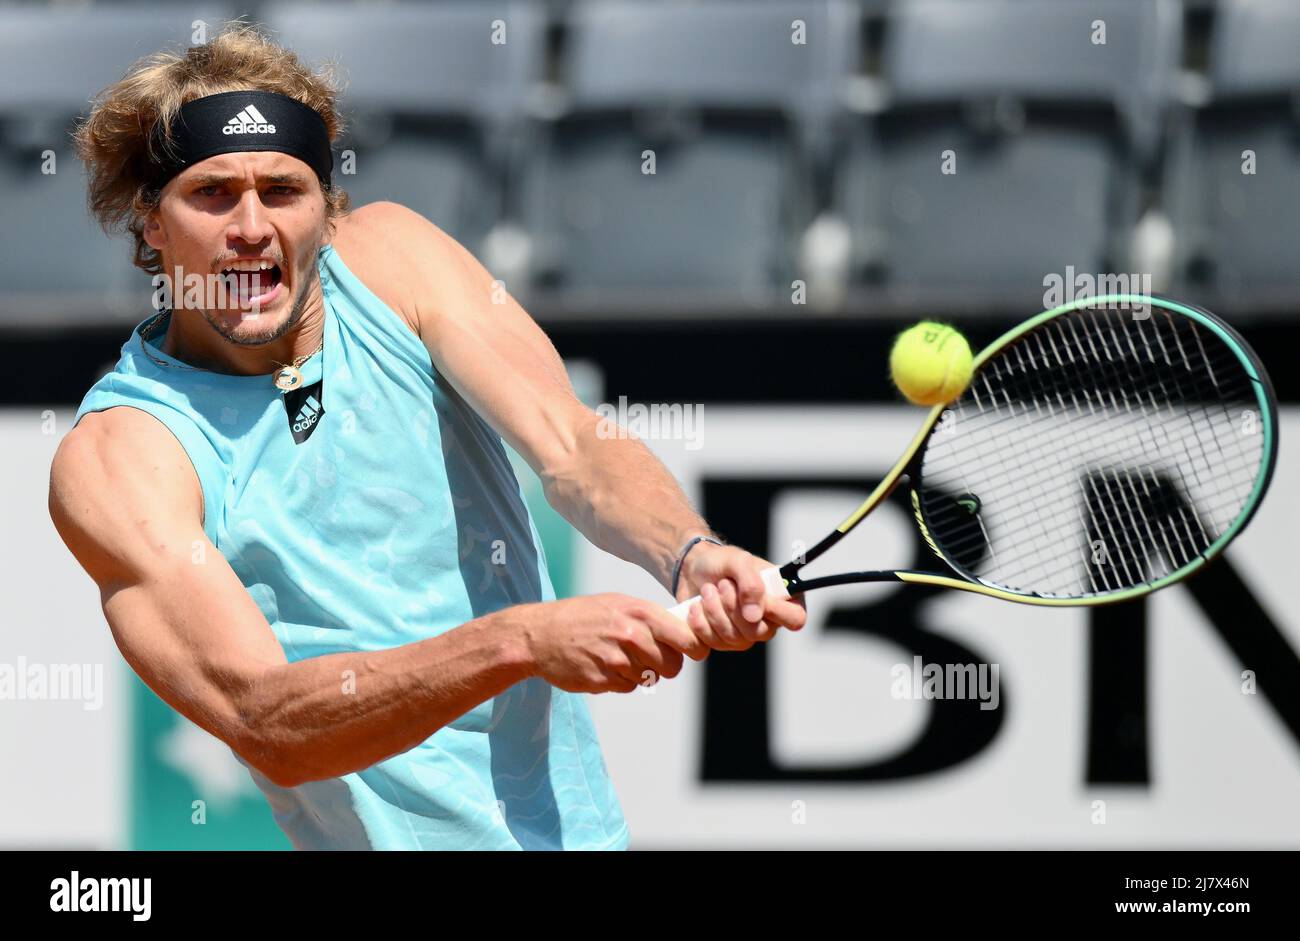 May 11, 2022, ROME Alexander Zverev of Germany in action against Sebastian Baez of Argentina during their mens singles second round match at the Italian Open tennis tournament in Rome, Italy, 11